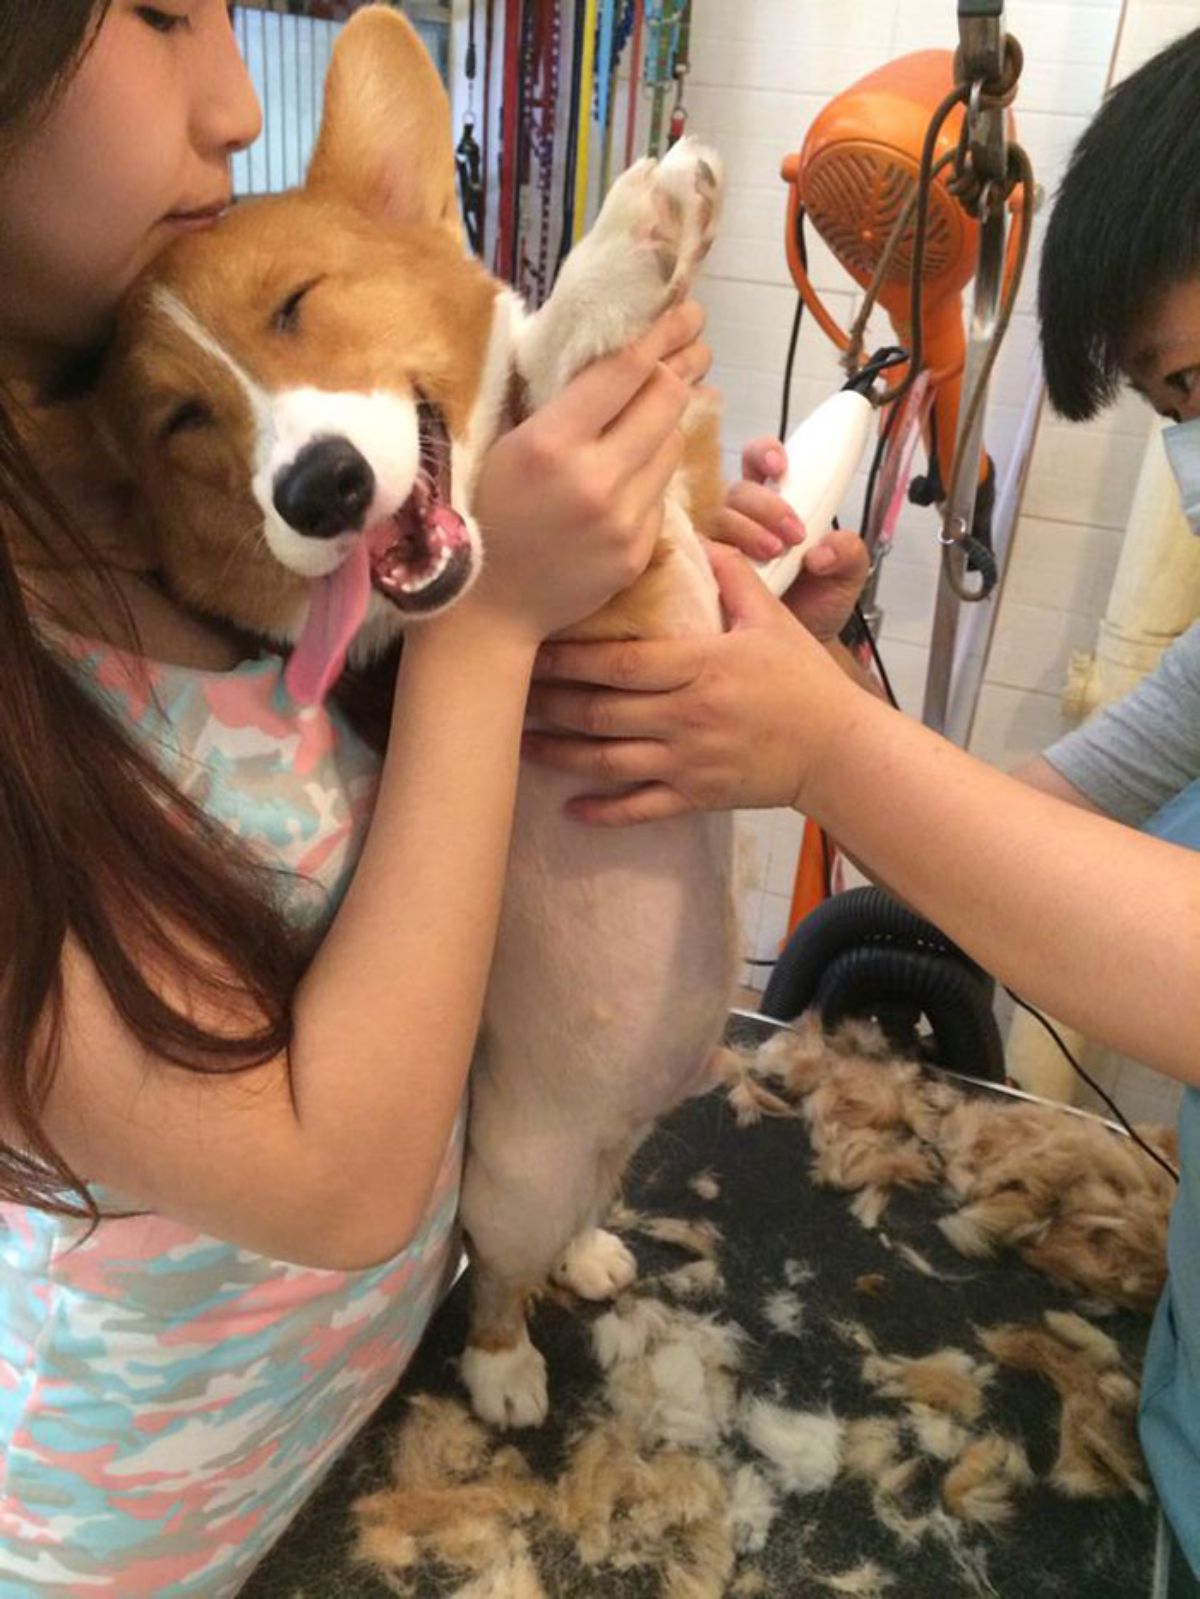 smiling brown and white corgi held up by someone while the dog's being shaved